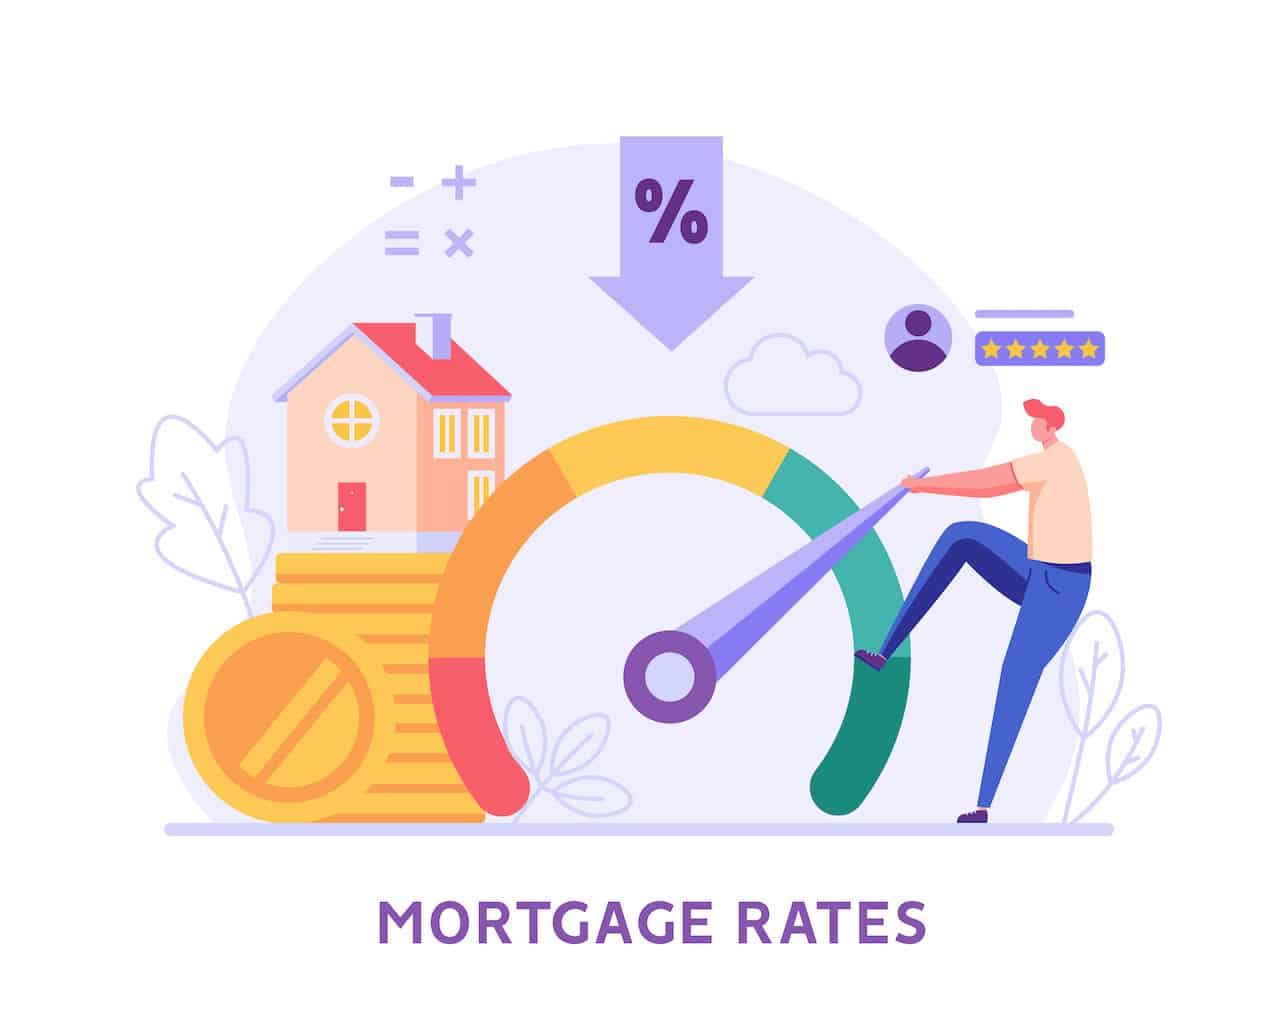 Mortgage Rates Illustrated: Incentives for Enhancing Your Credit Score